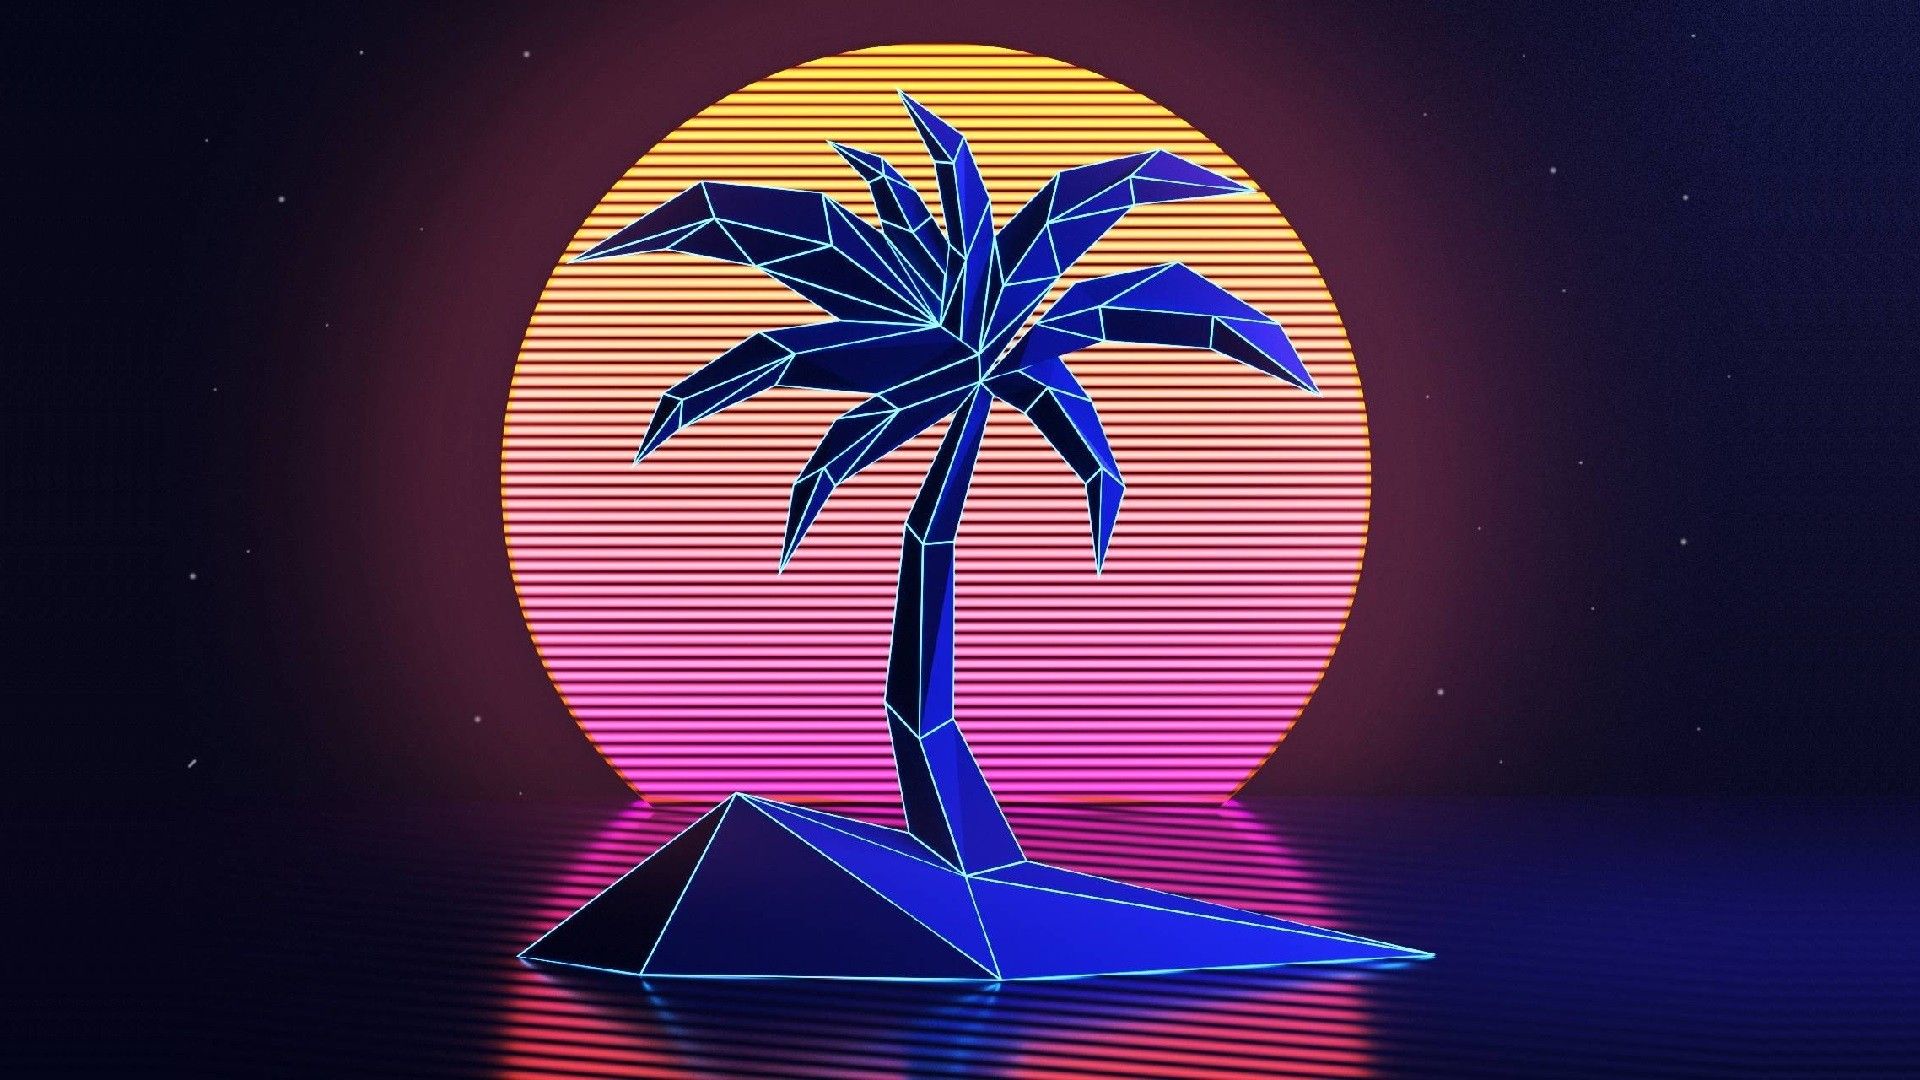 VHS Palm Trees 1980s New Retro Wave Retro Style Vintage Sunset Neon Wallpaper:1920x1080